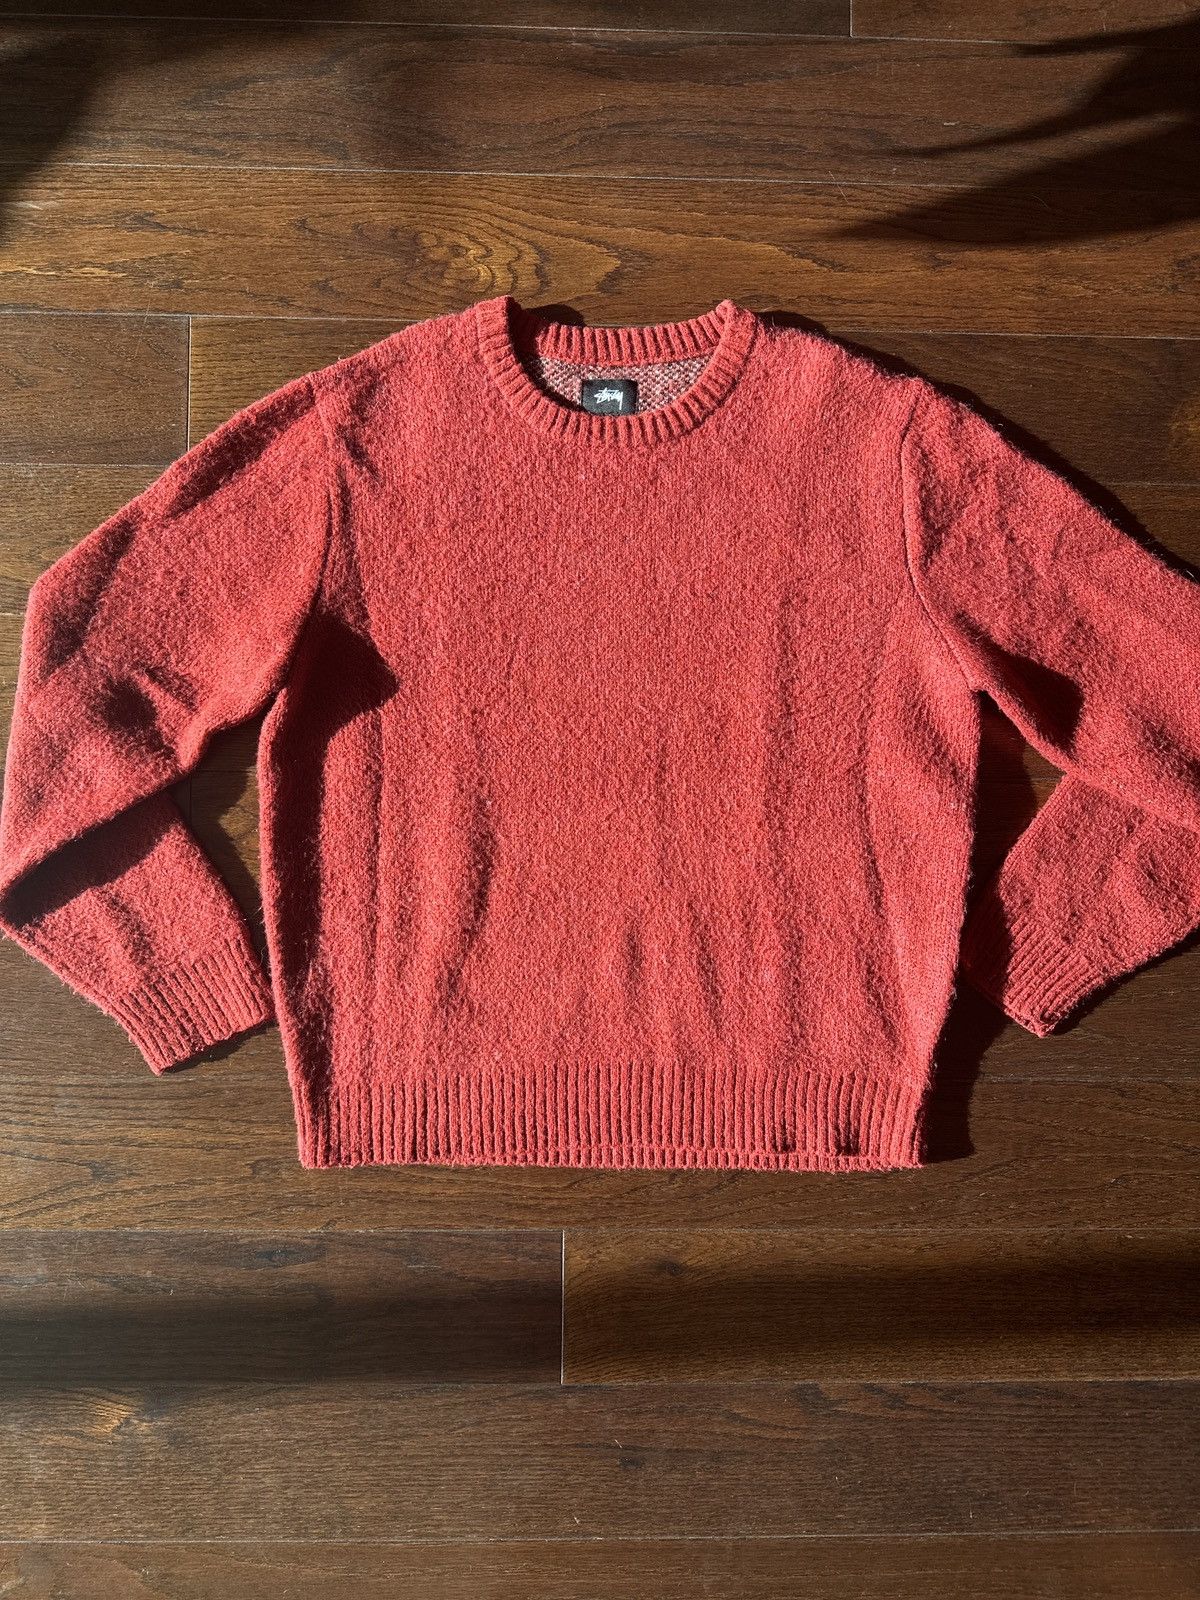 Stussy Stussy 8 ball Brushed Mohair Knit Sweater | Grailed